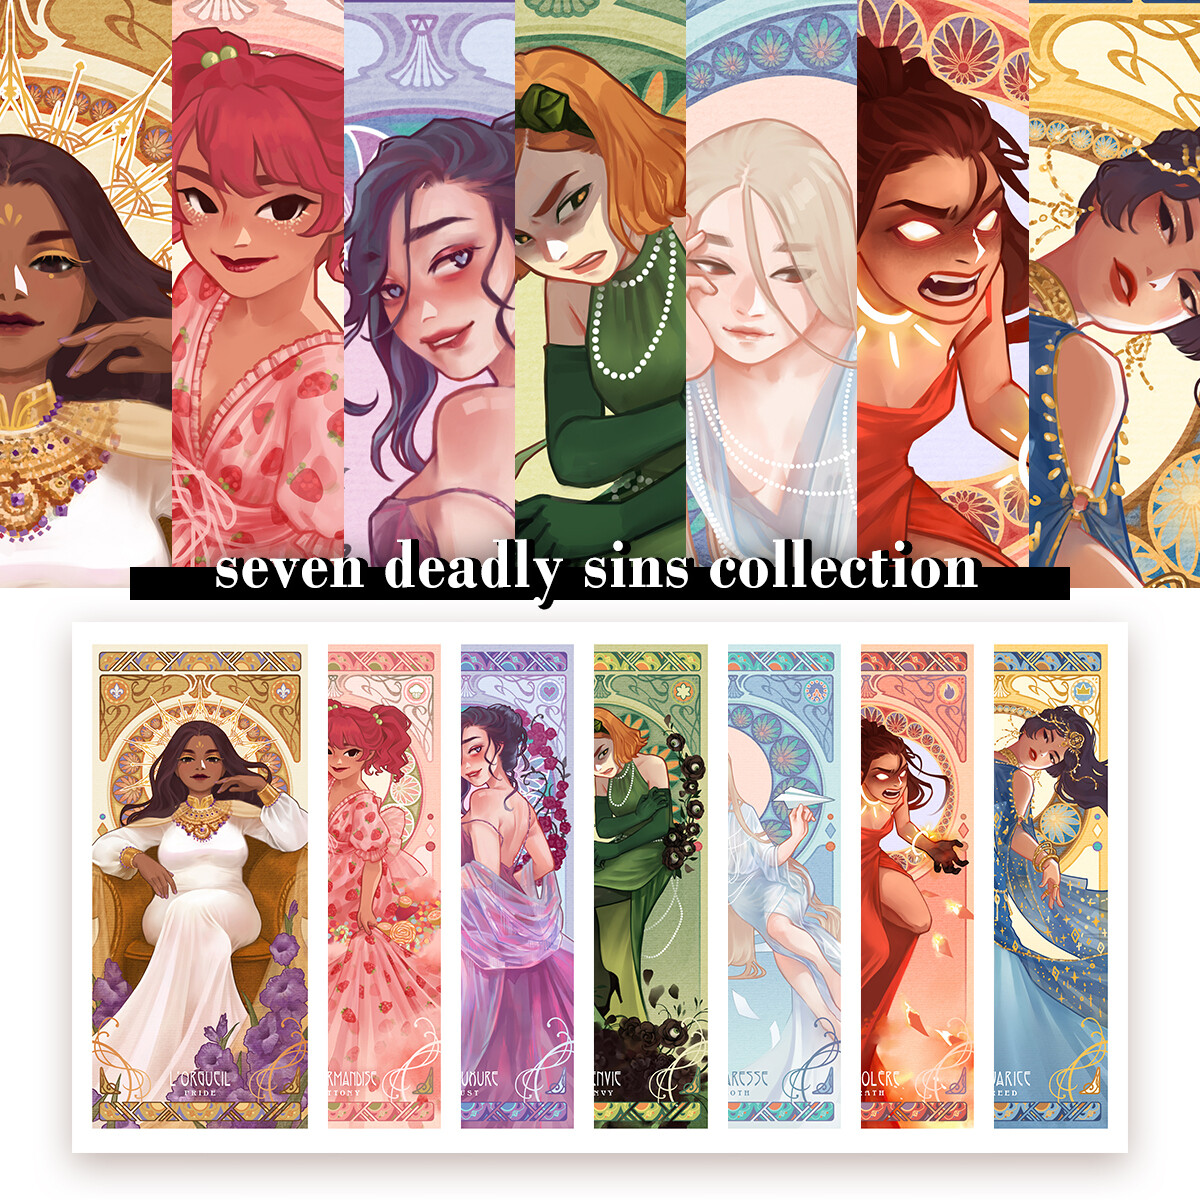 7 DEADLY SINS | Prints collection